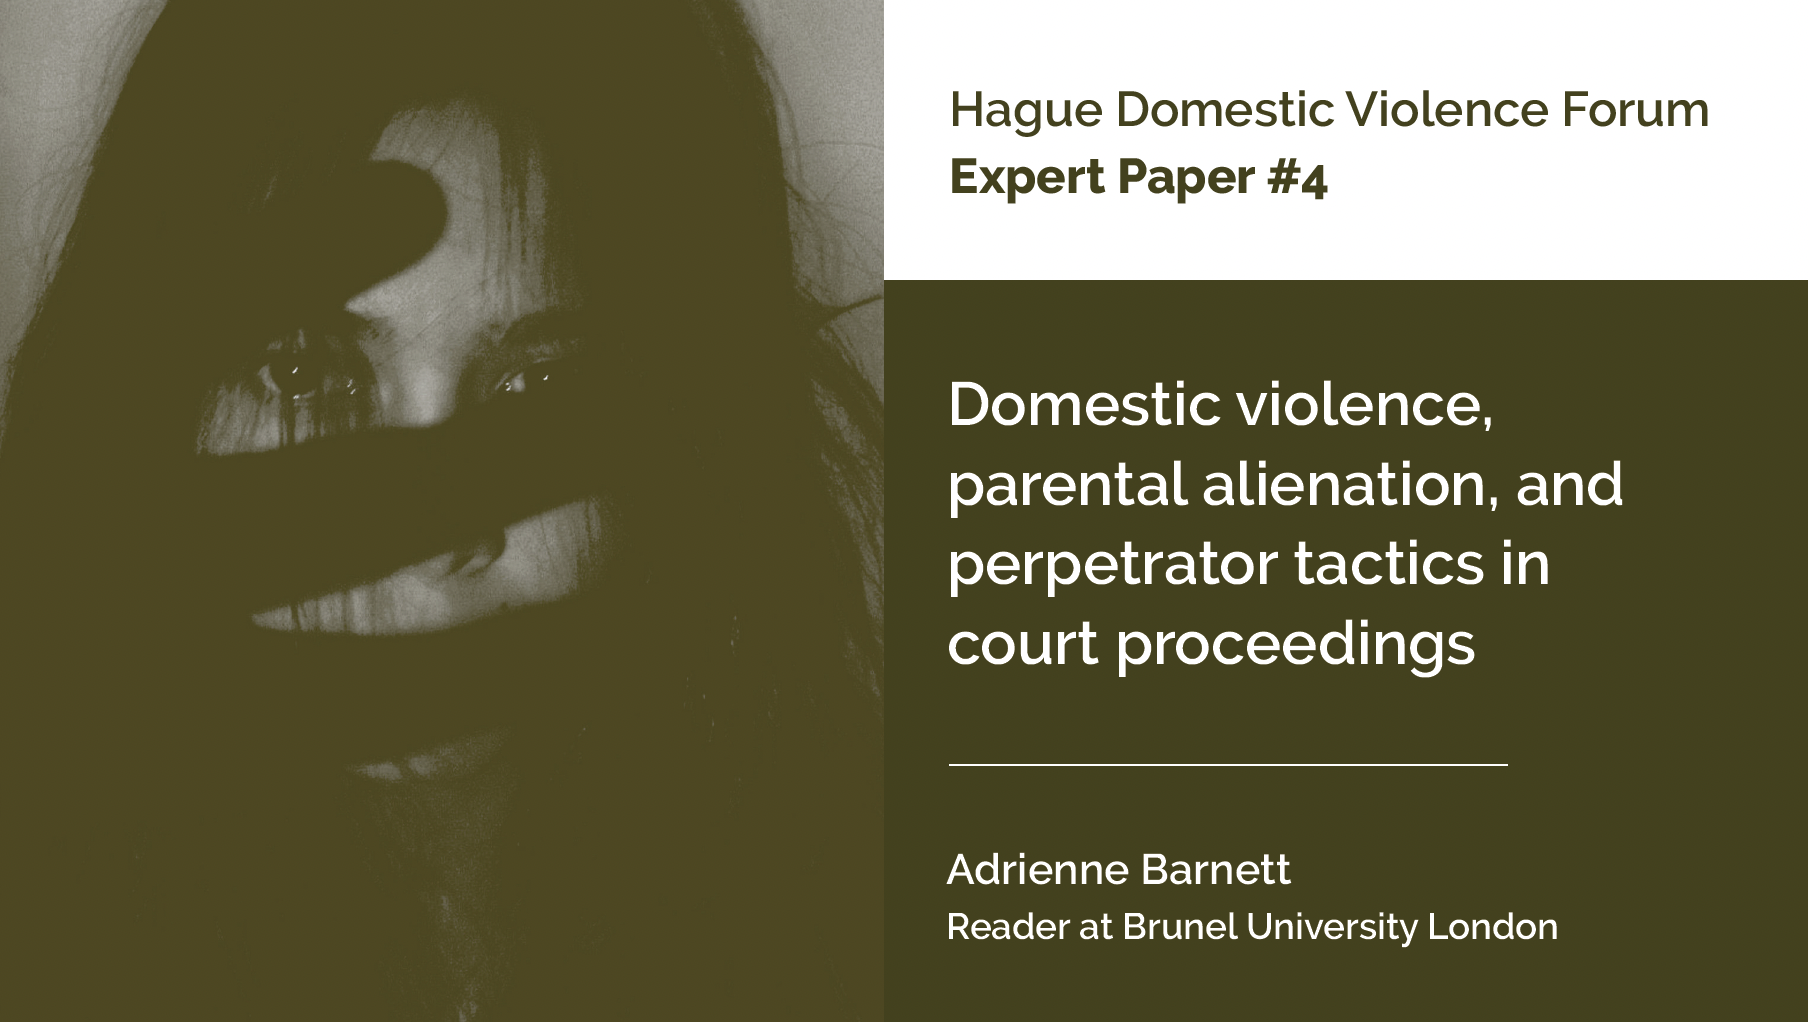 Expert Paper 4: Domestic violence, parental alienation, and perpetrator tactics in court proceedings